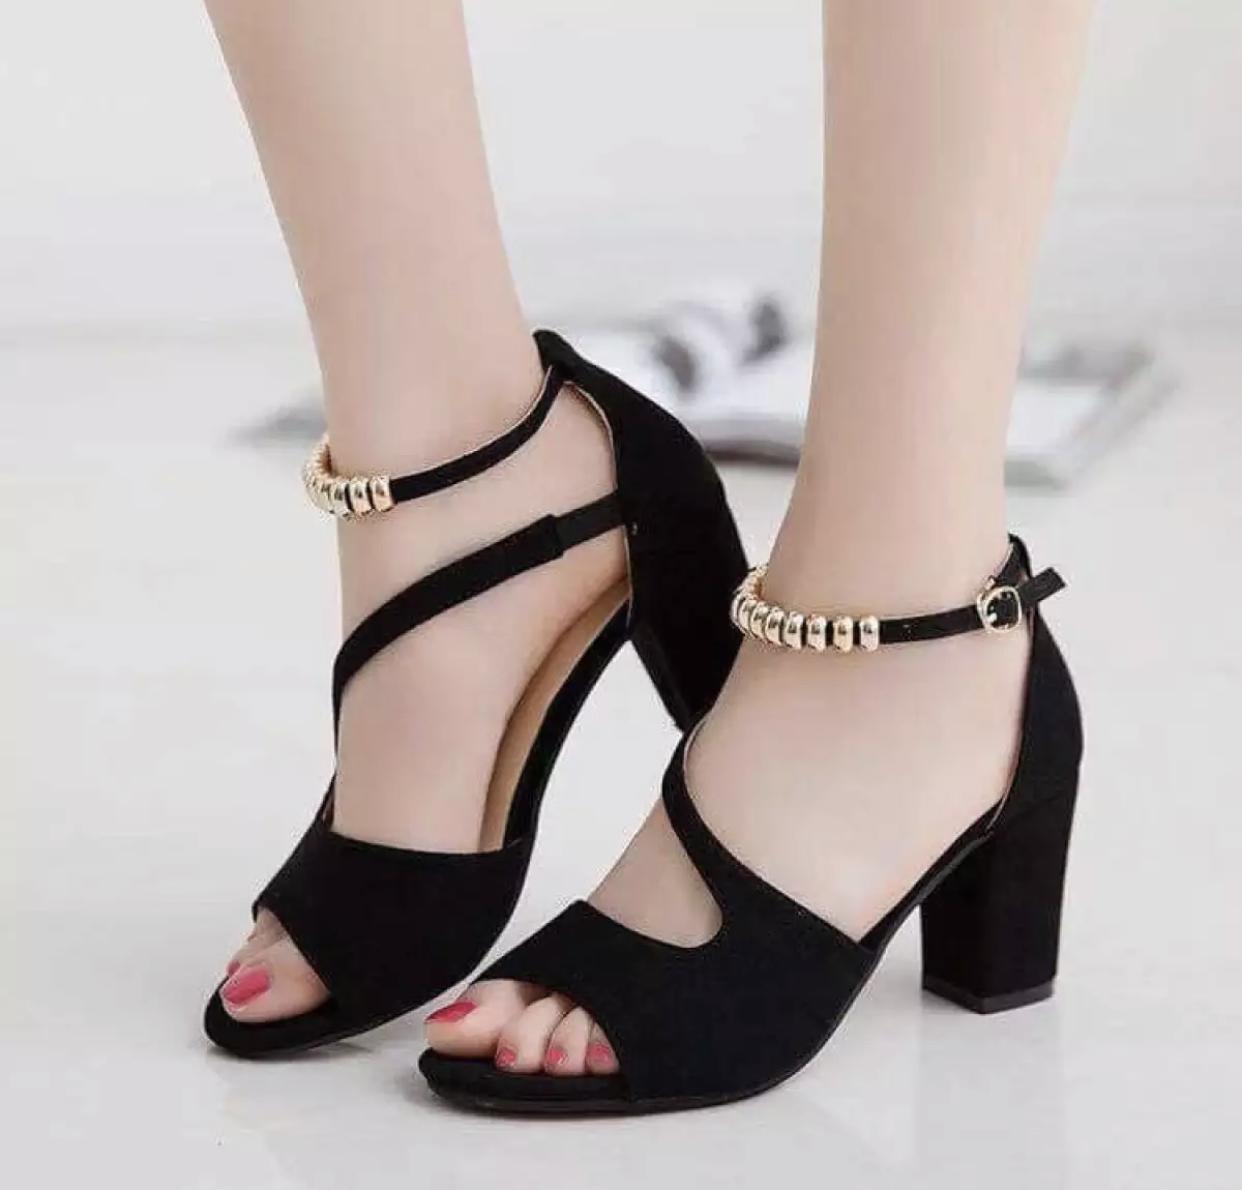 2019 fashion sandals ,new heels for 